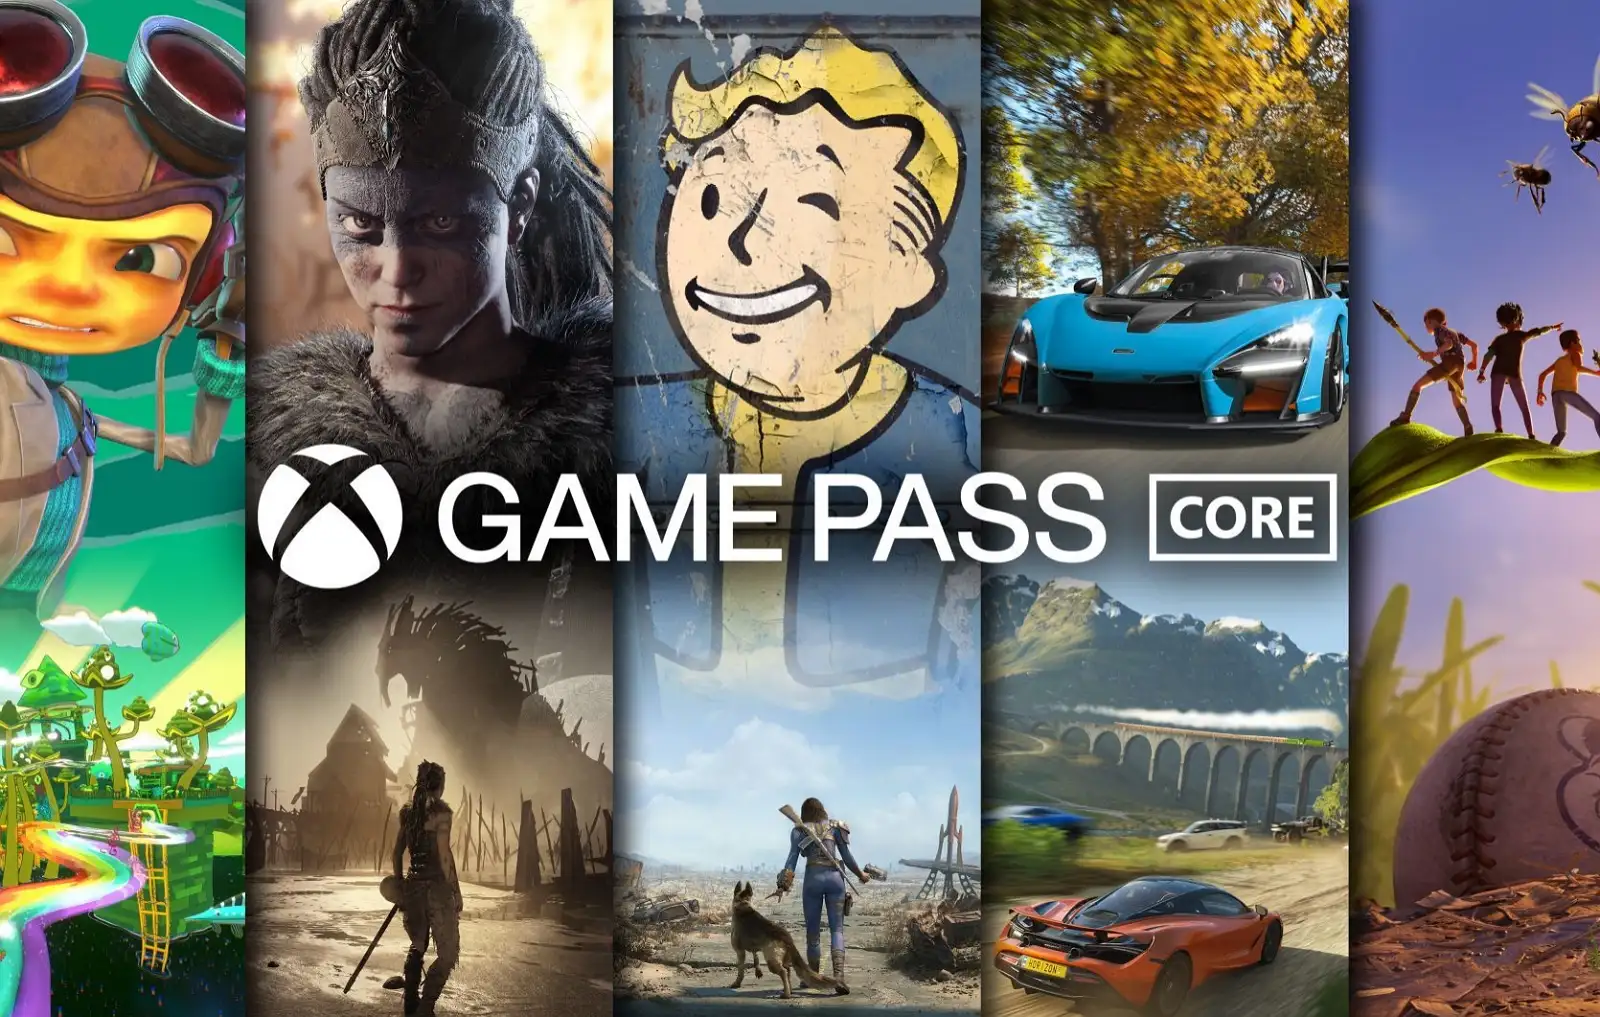 Xbox Game Pass Subscribers Say They're Unsubscribing, For Now